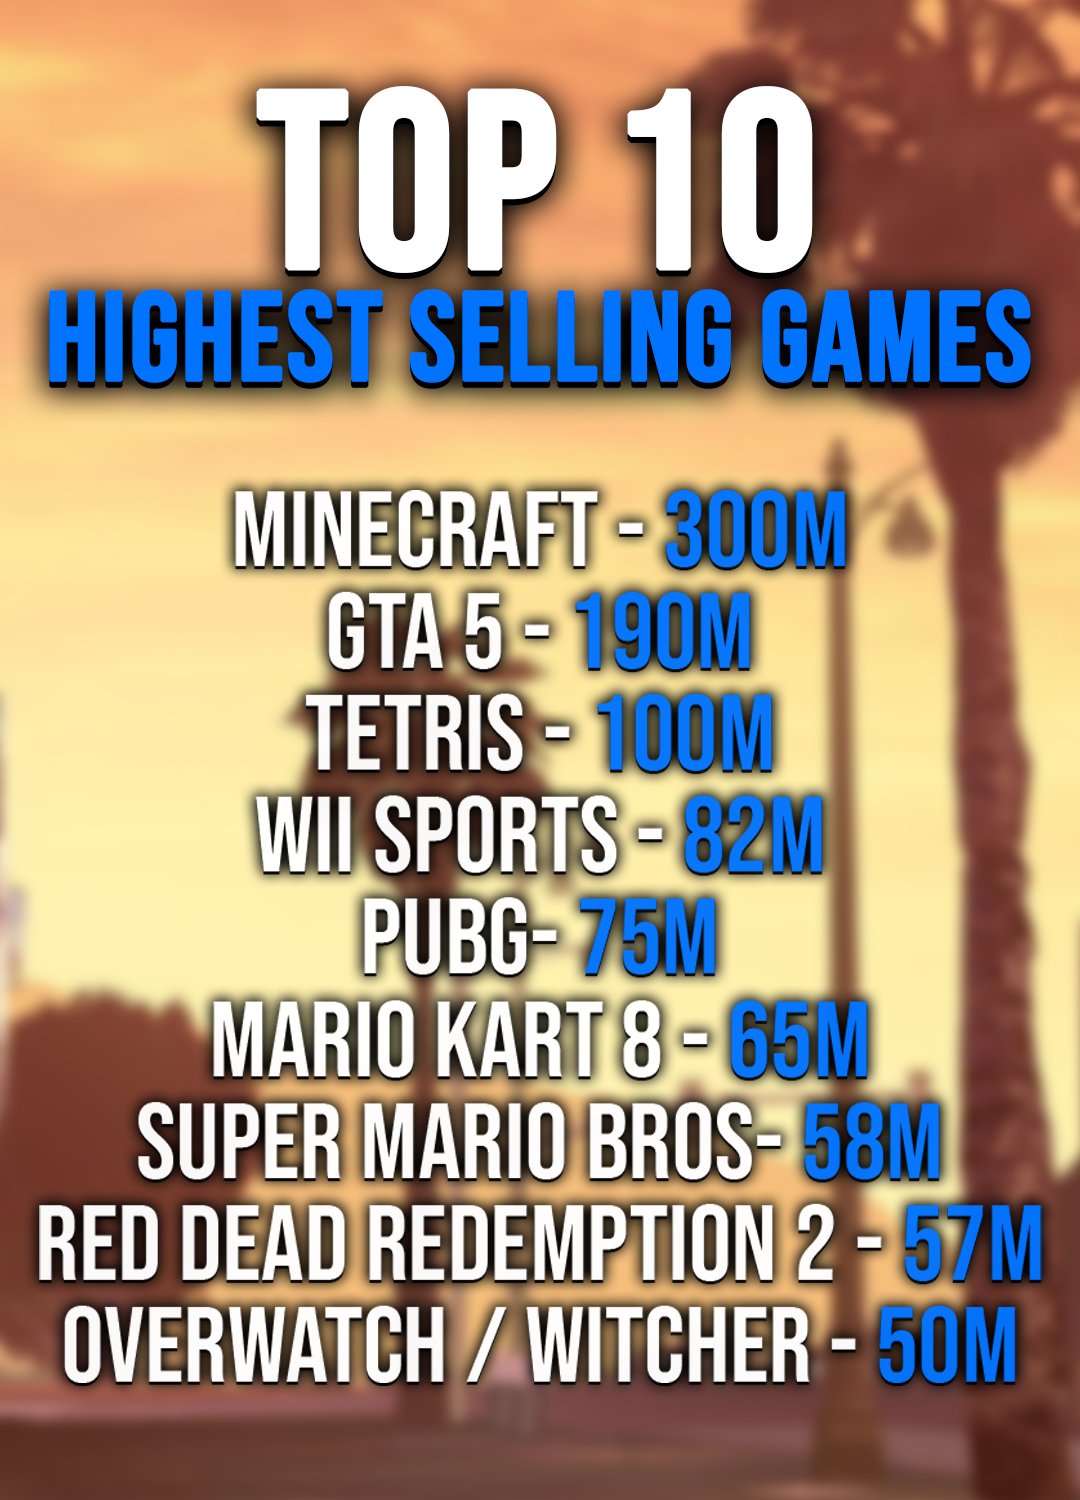 Minecraft Is the Highest-Selling Game of All Time, Behind Tetris